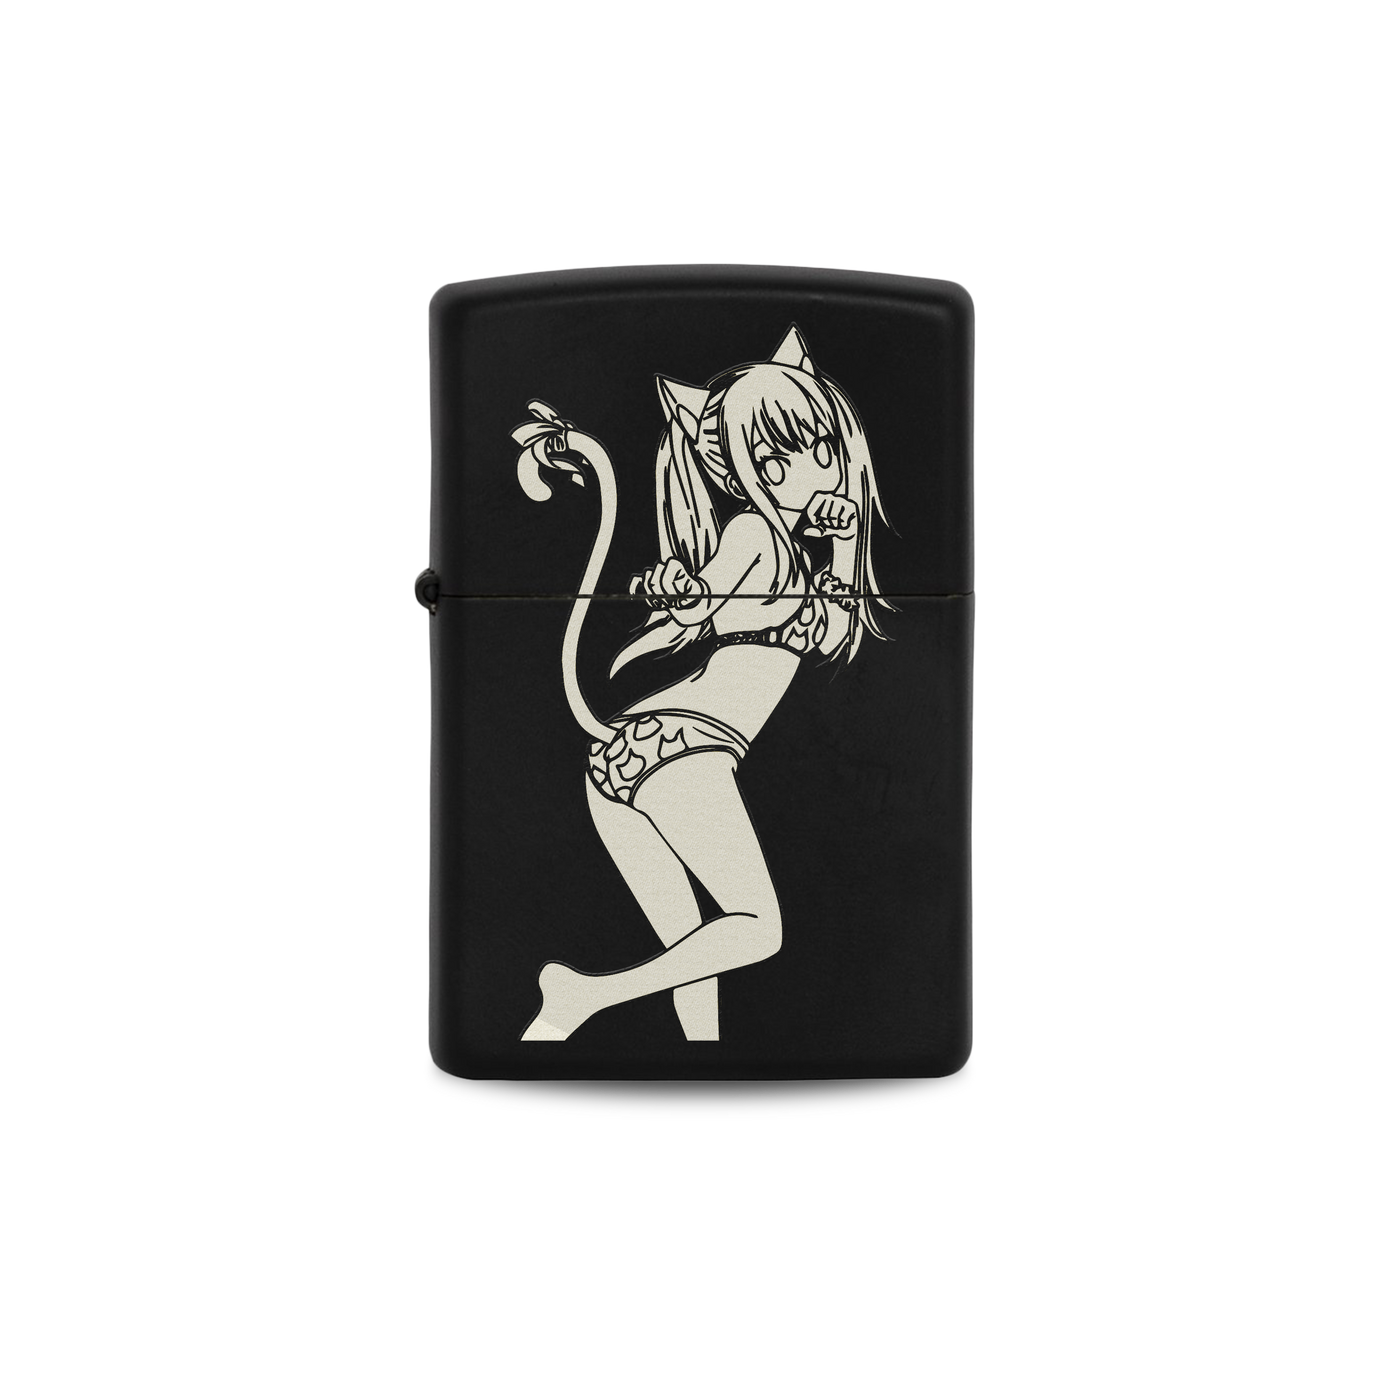 Amazon.co.jp: Touhou Series Fujiwara Senko Lighter Case, Cute, Zippo  Lighter, Replacement Outer Case, Windproof, Shockproof, Stylish, Unique,  Two-Sided Print, Anime Pattern, Smoking Goods, Lighter Protection, Fall  Prevention, Gift, Unisex, Outdoor ...